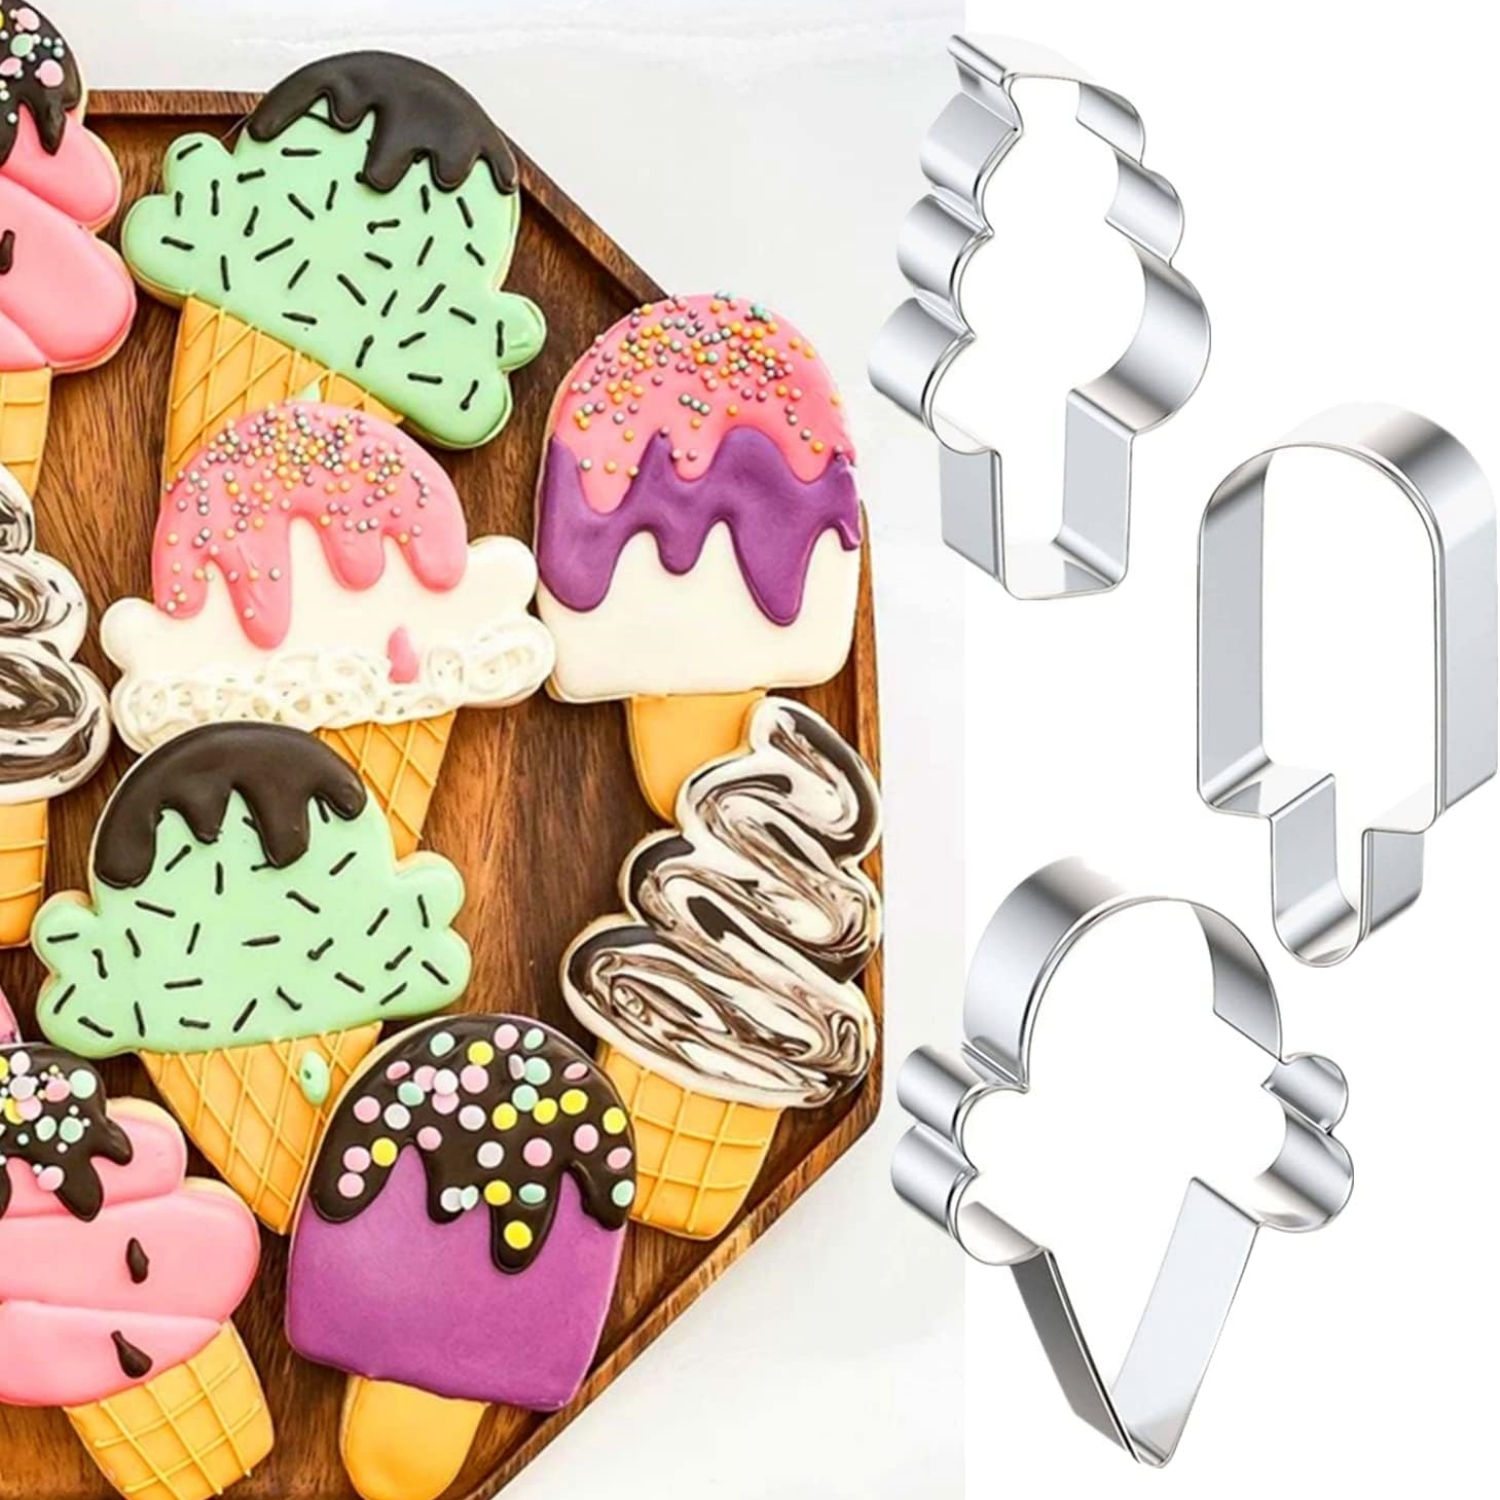 Christmas Cute Animal Cookie Cutter Mold Cartoon Rabbit Bear Ice Cream  Shaped Biscuit Mold Fondant Baking Cake Decorating Tool